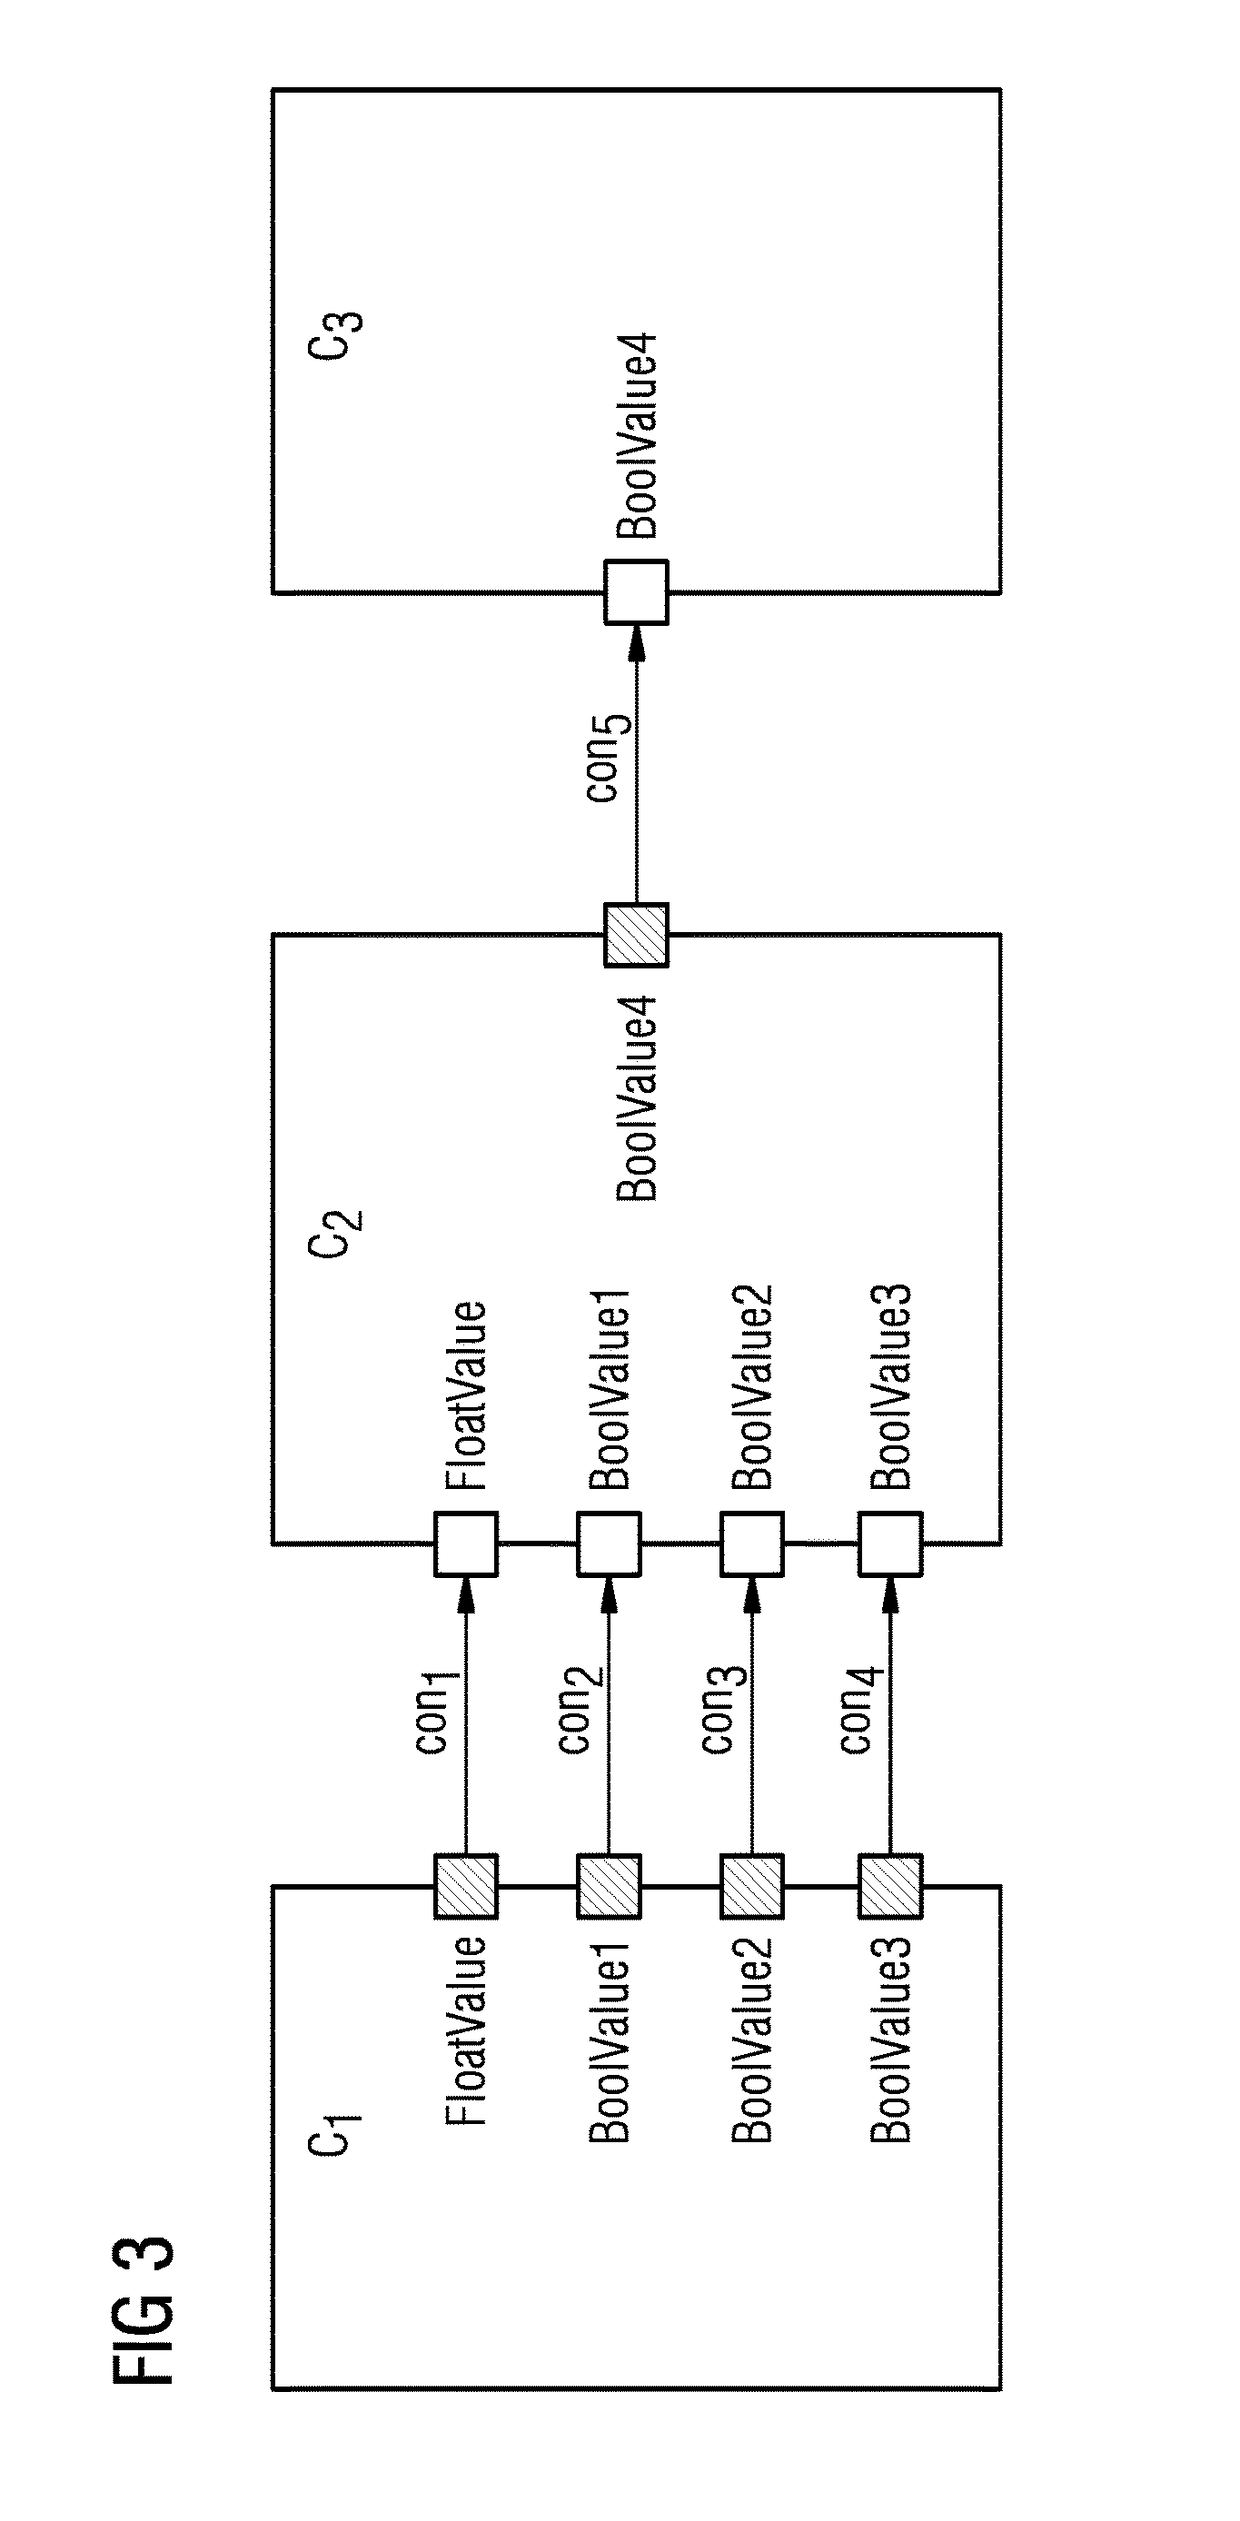 Method and apparatus for automatically generating a component fault tree of a safety-critical system